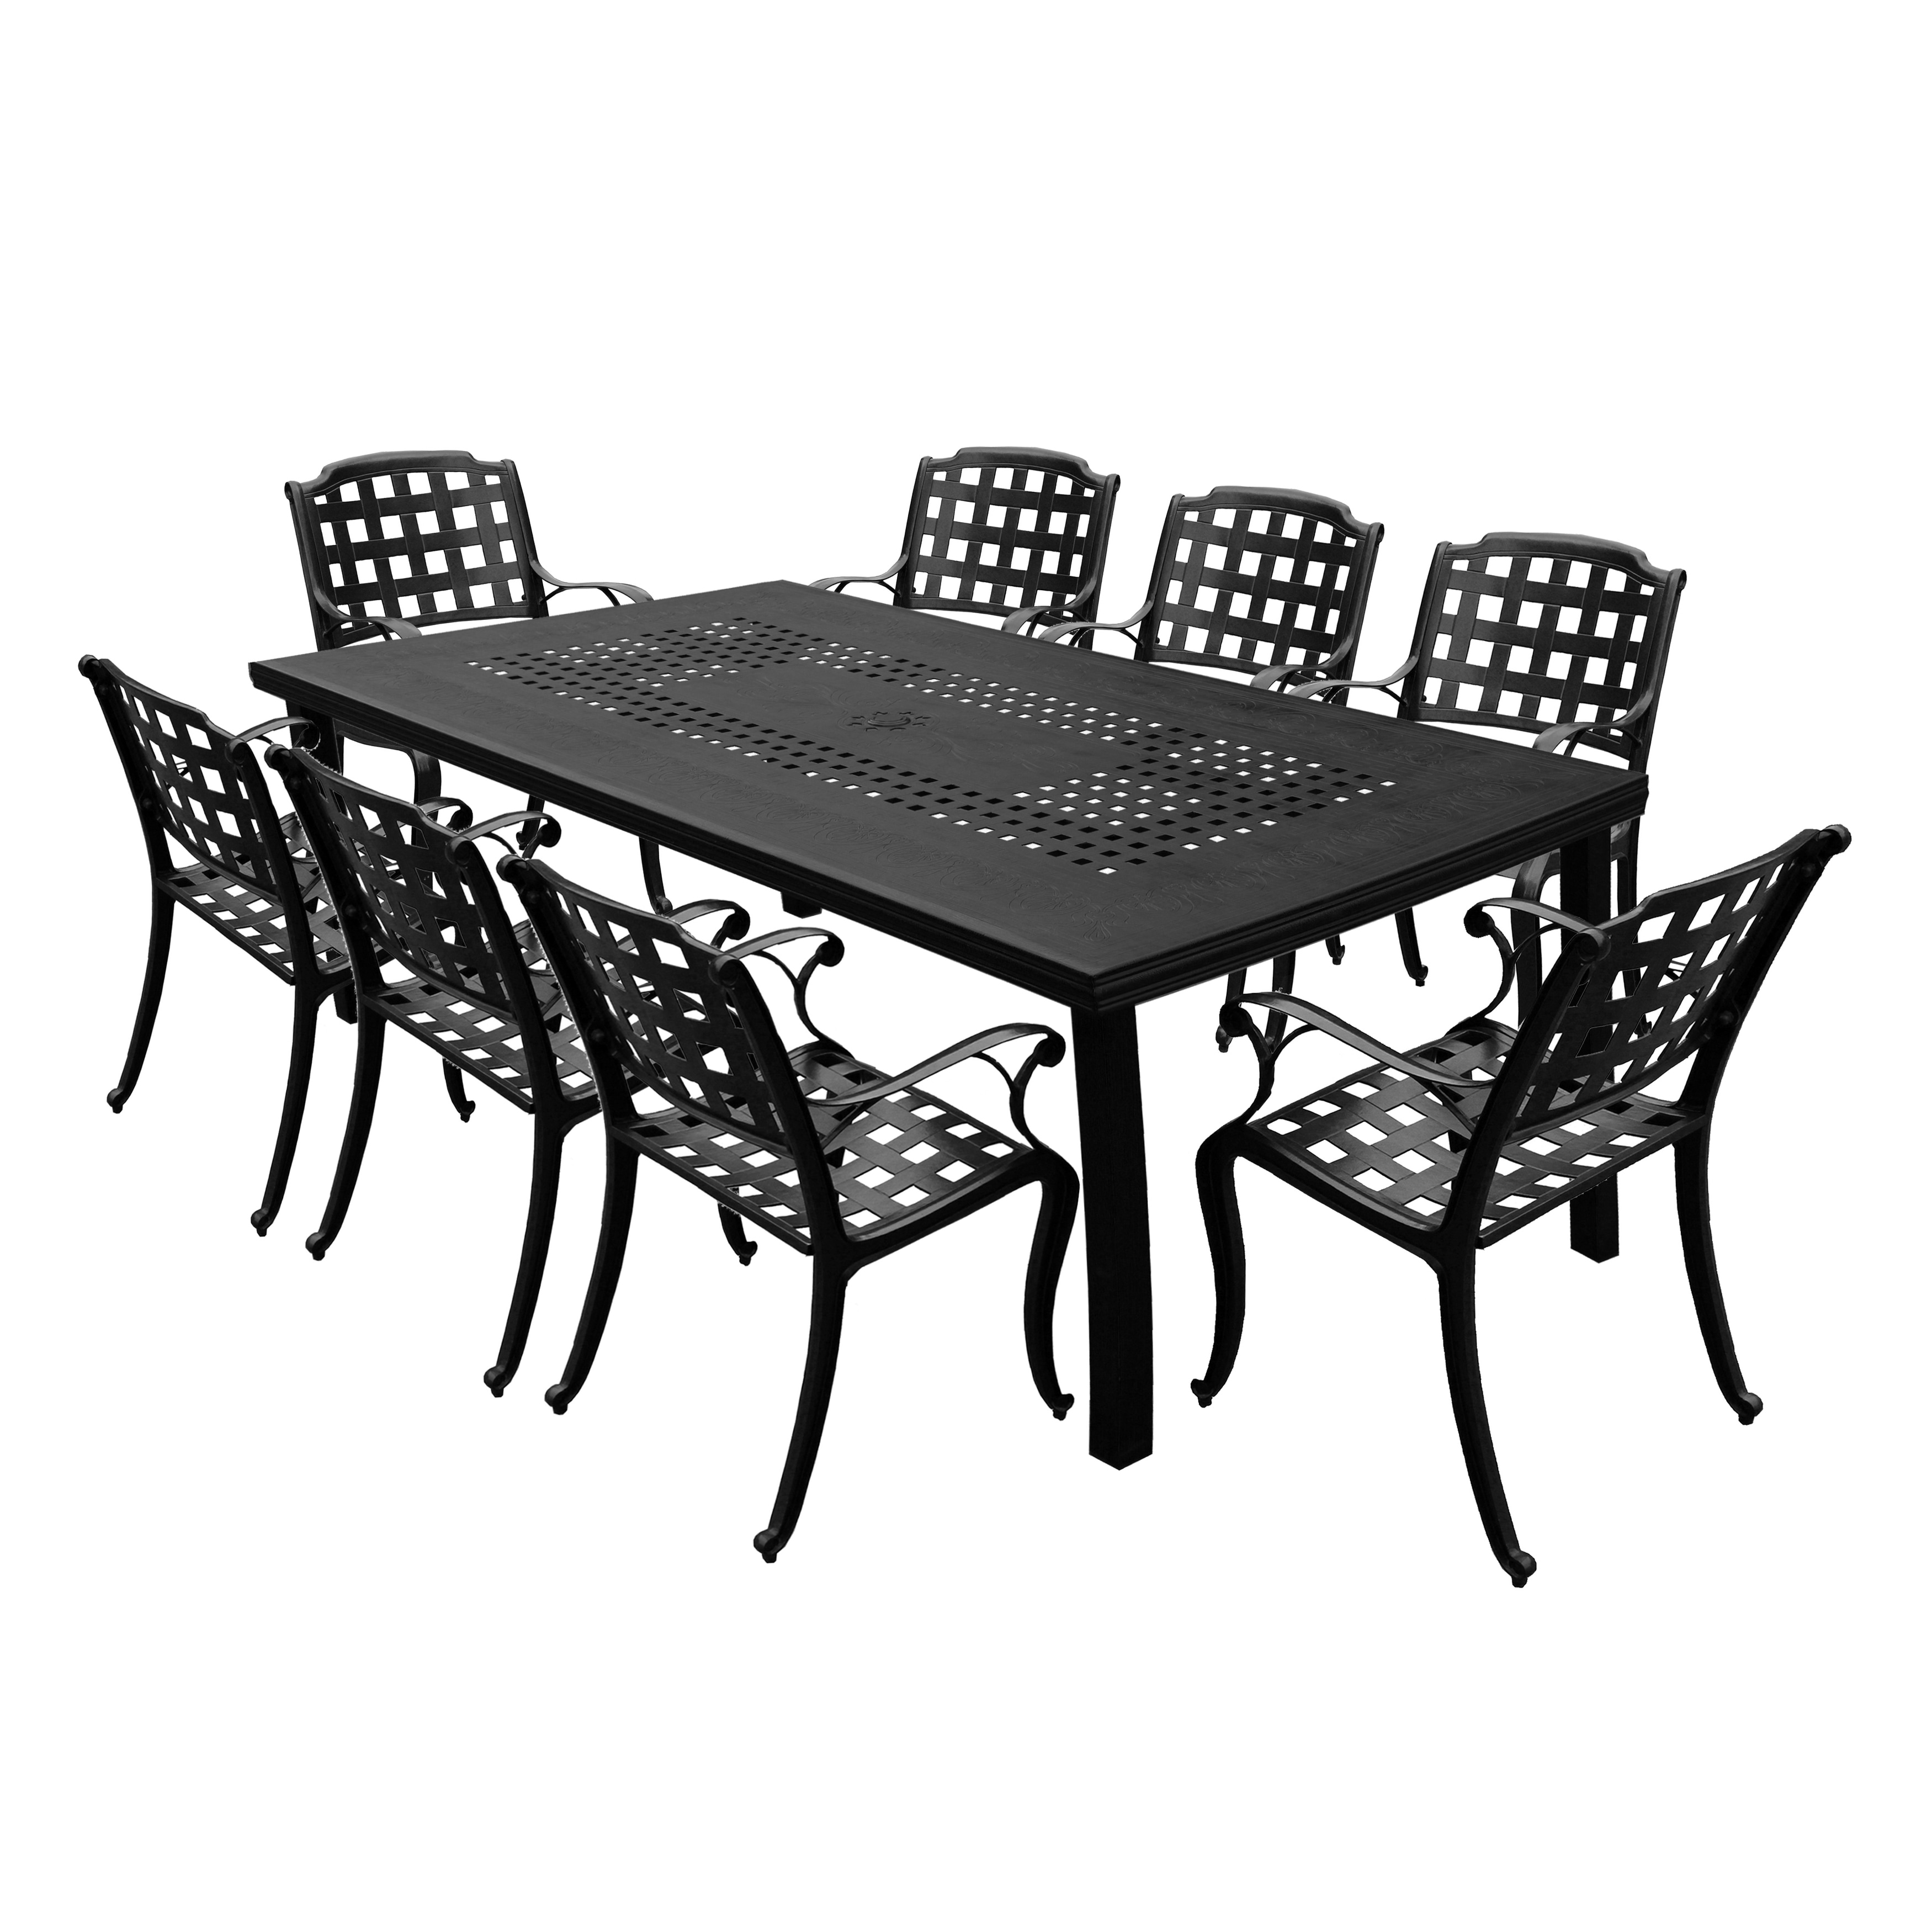 Modern Outdoor Mesh Lattice Aluminum 95-in Large Rectangular Patio Dining Set With Eight Arm Chairs - N/a